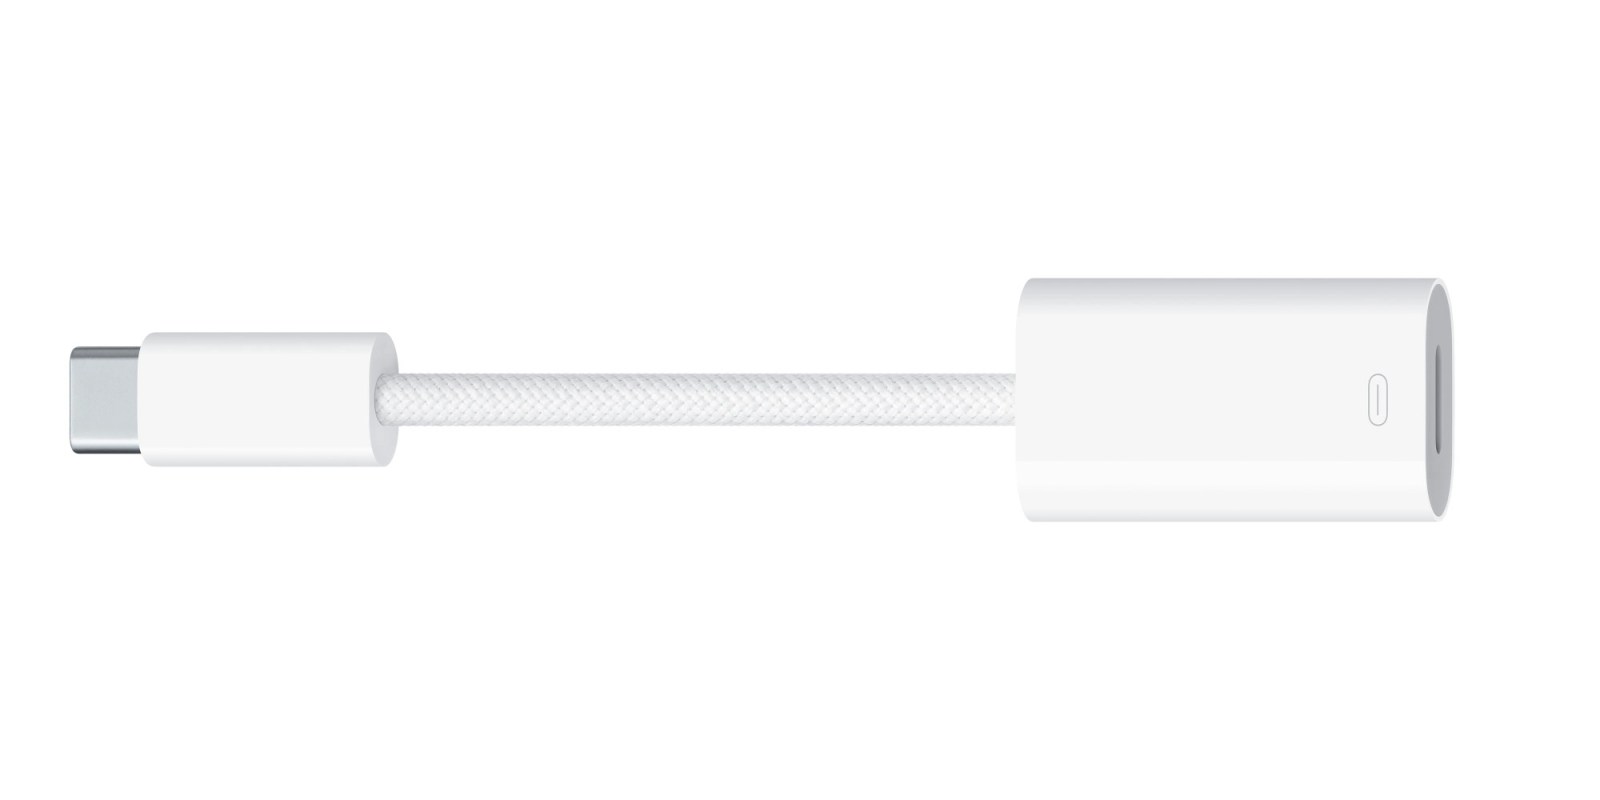 About the Apple USB-C to USB Adapter - Apple Support